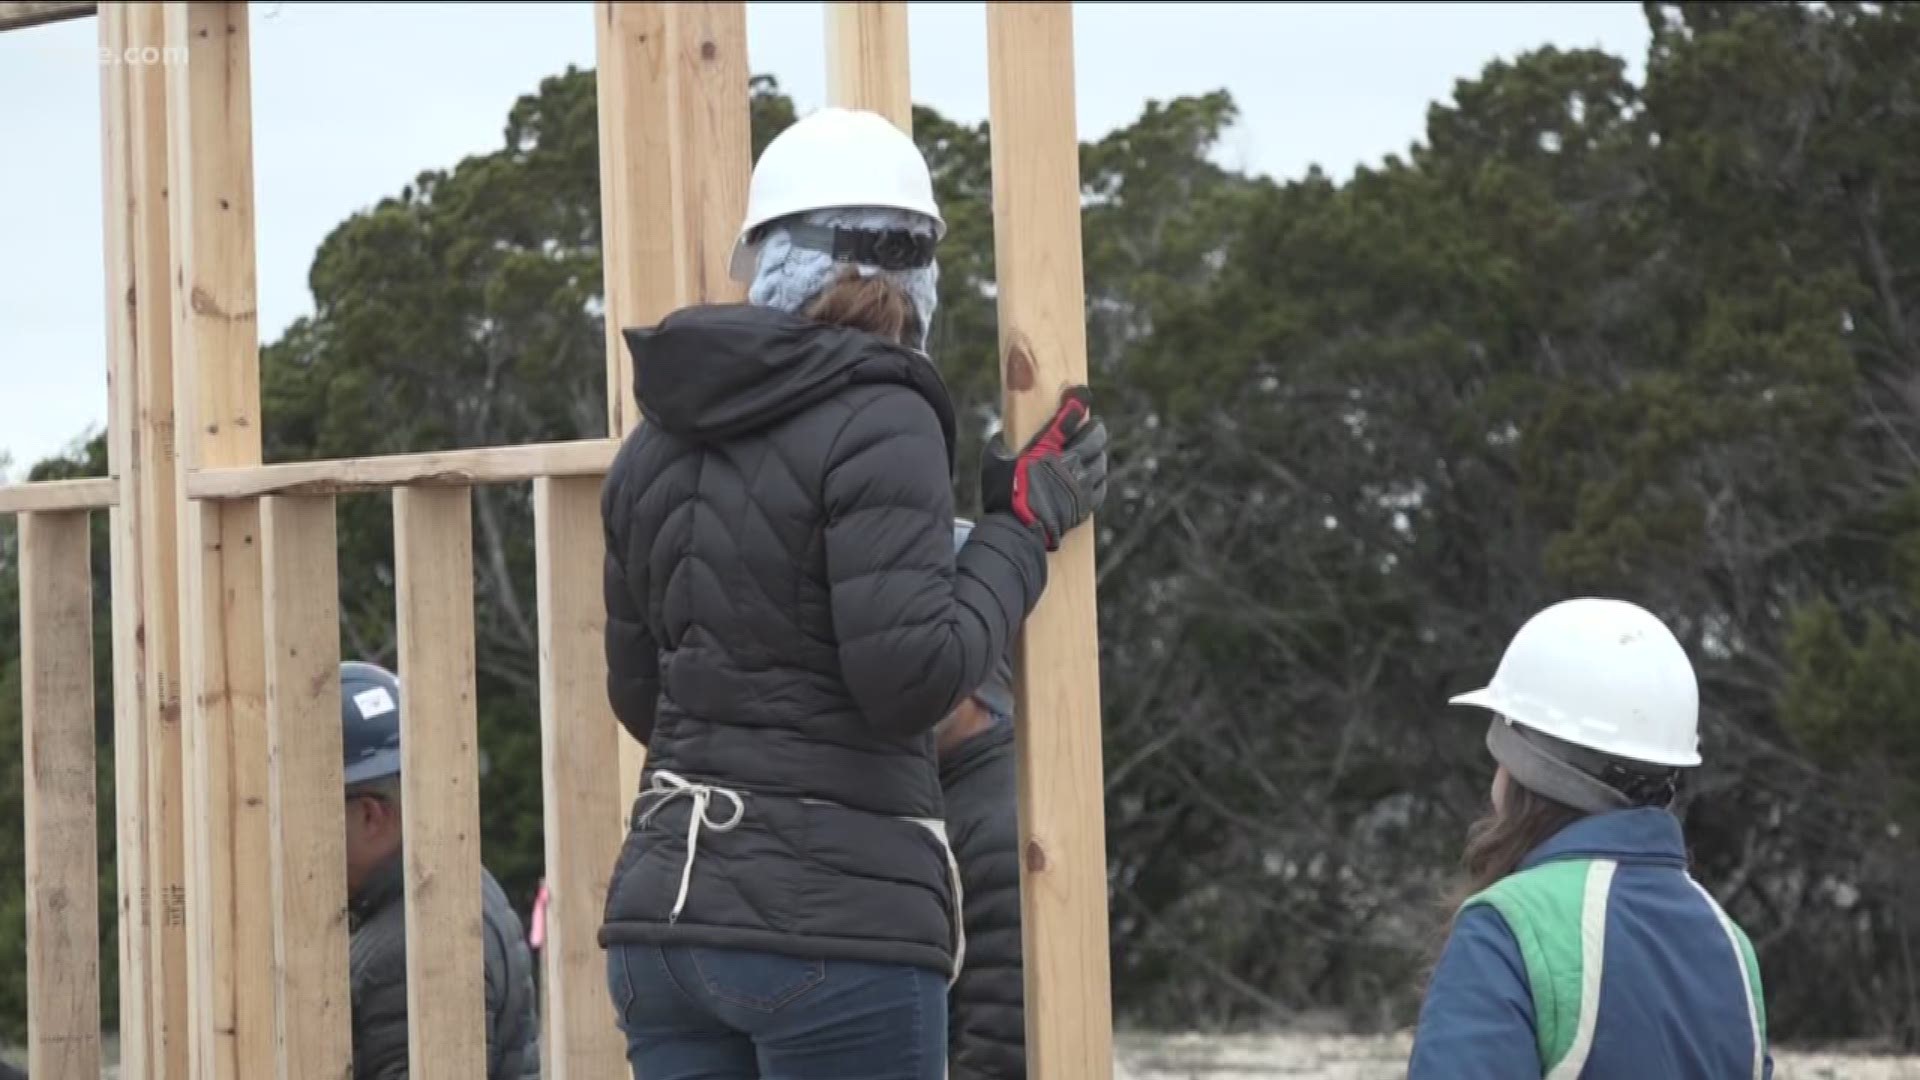 A few companies are working to become part of the solution by building homes and partnering with Habitat for Humanity.